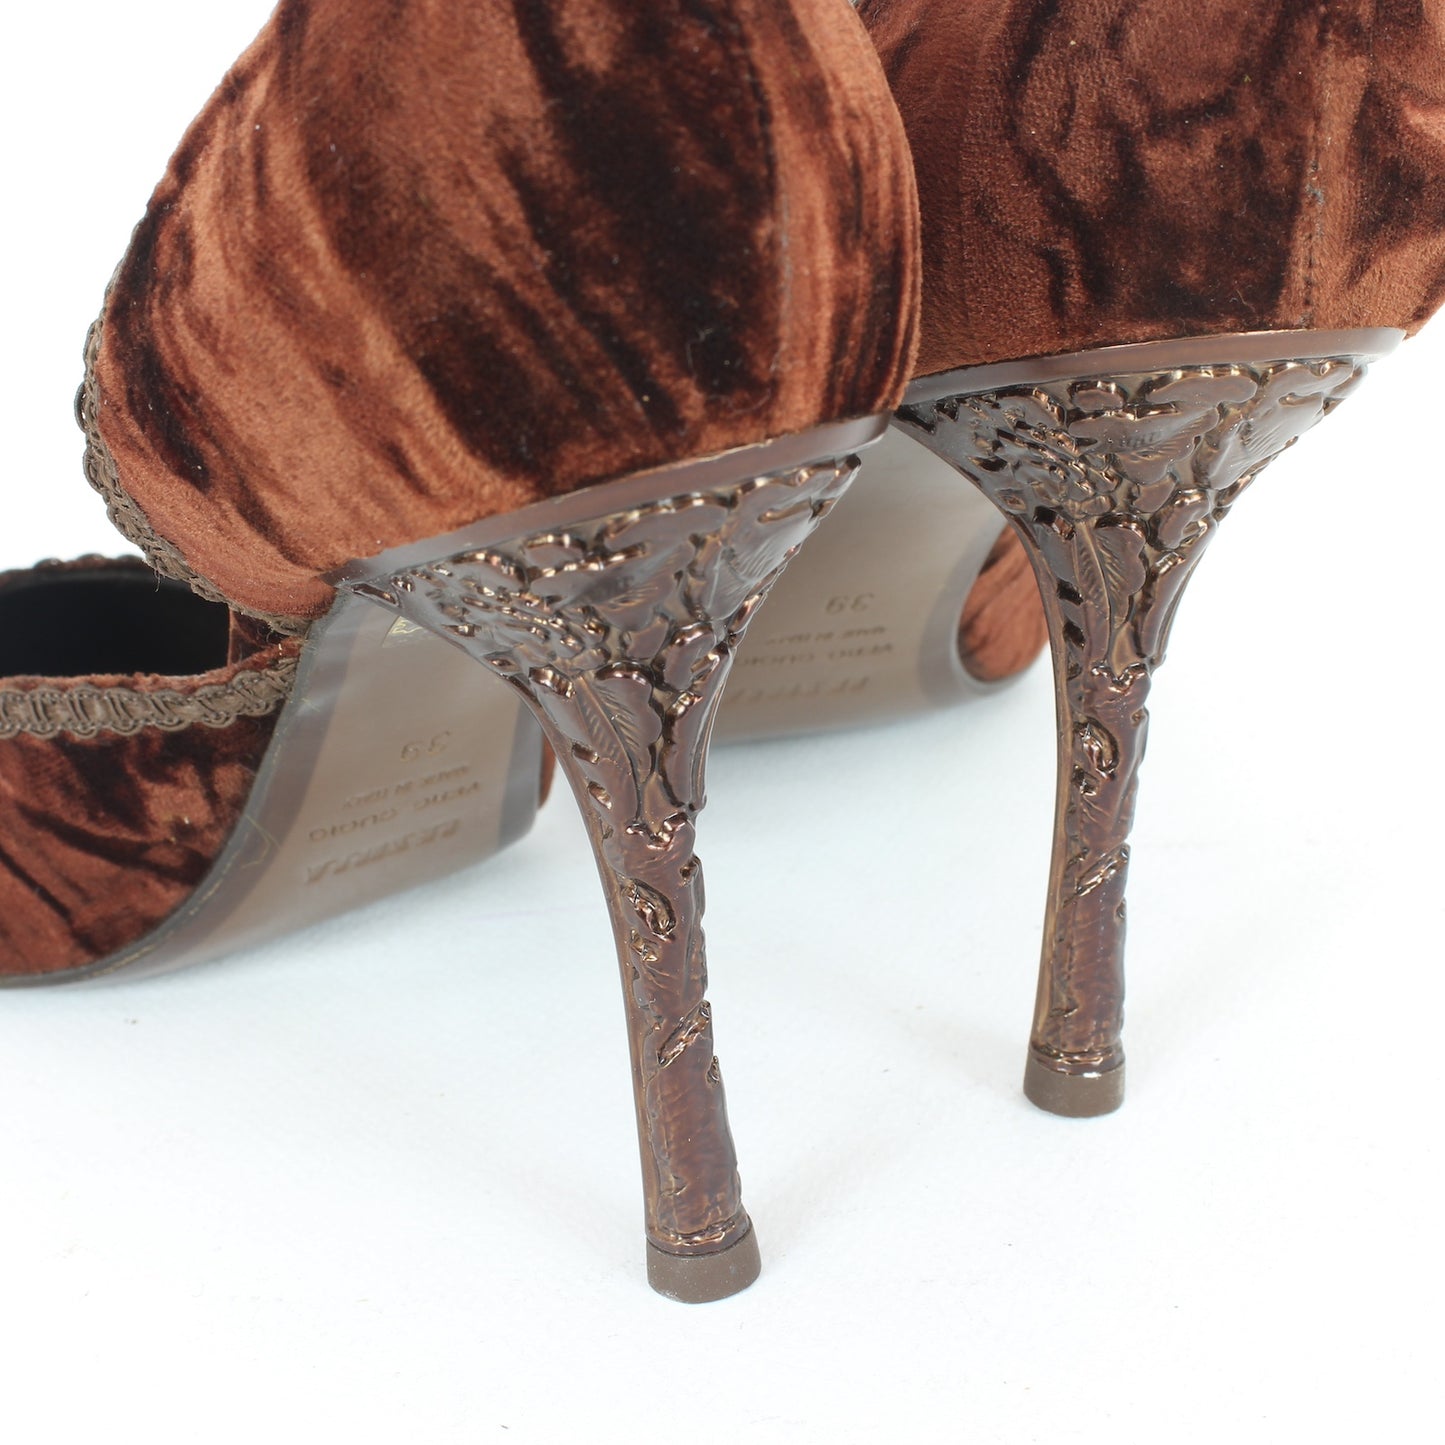 Le Silla Brown Velvet Inlaid Heel Shoes 2000s